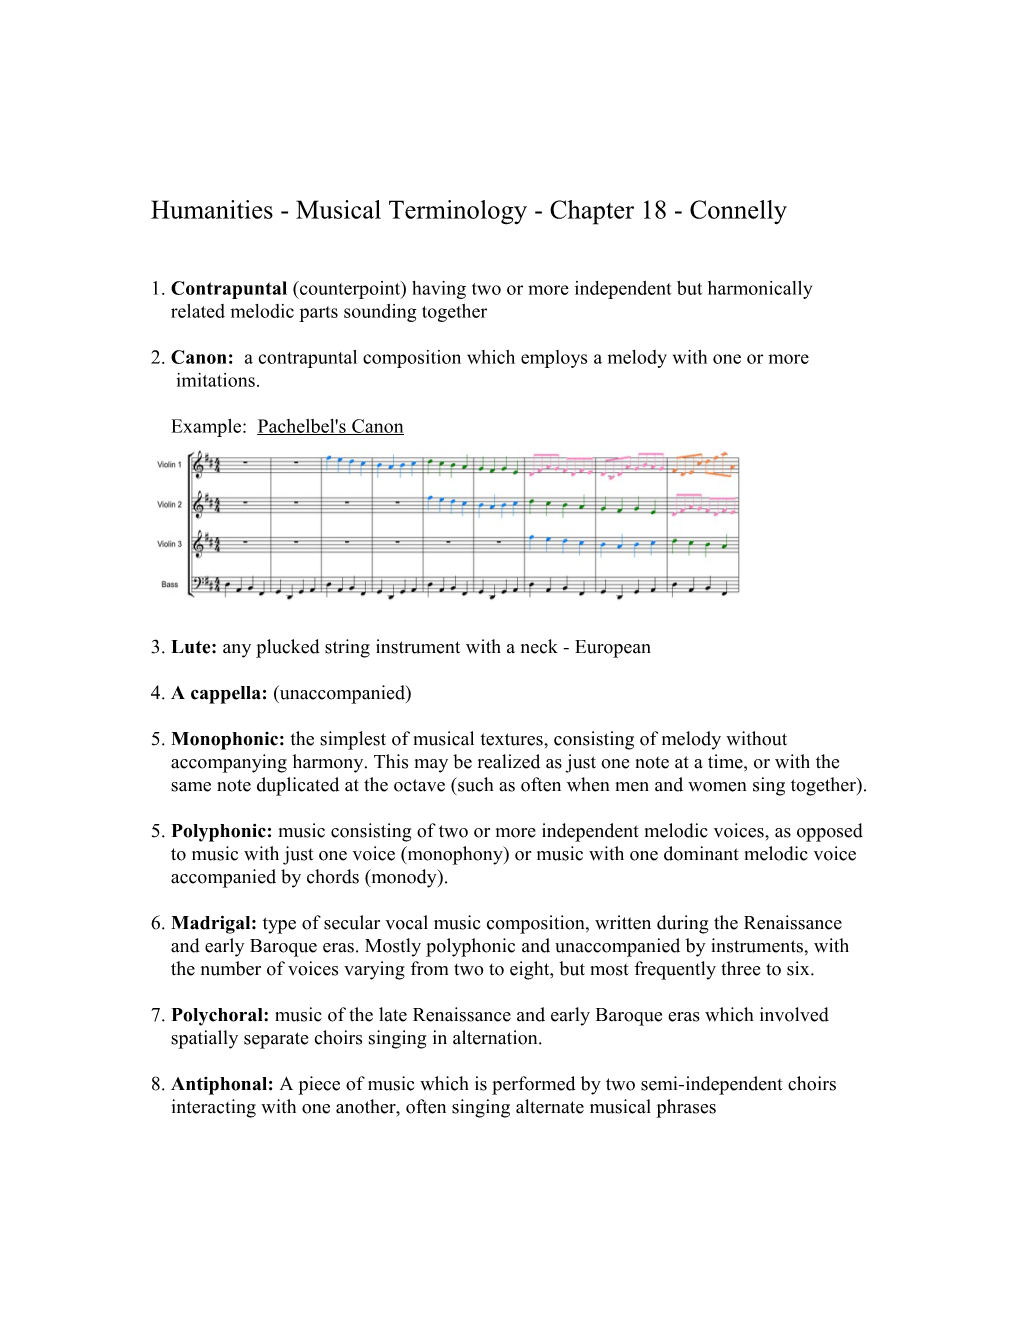 Humanities - Musical Terminology - Chapter 18 - Connelly